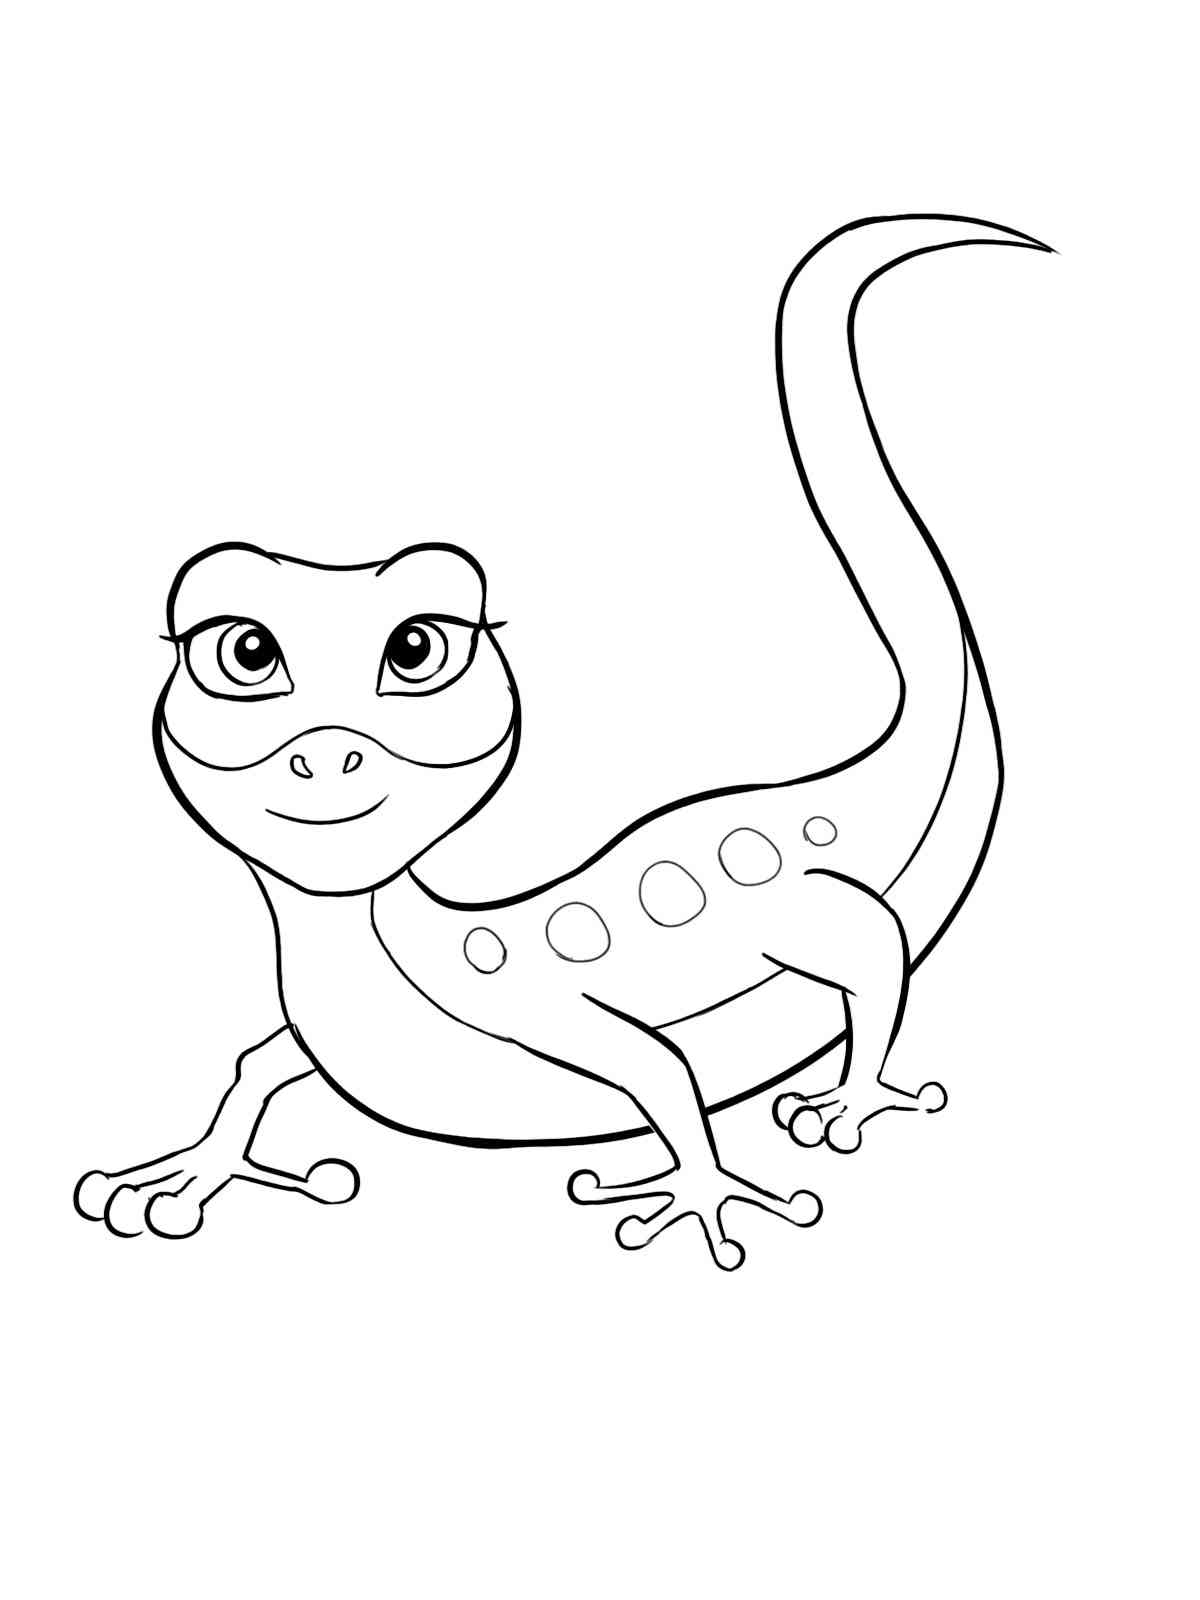 Funny Newt coloring page